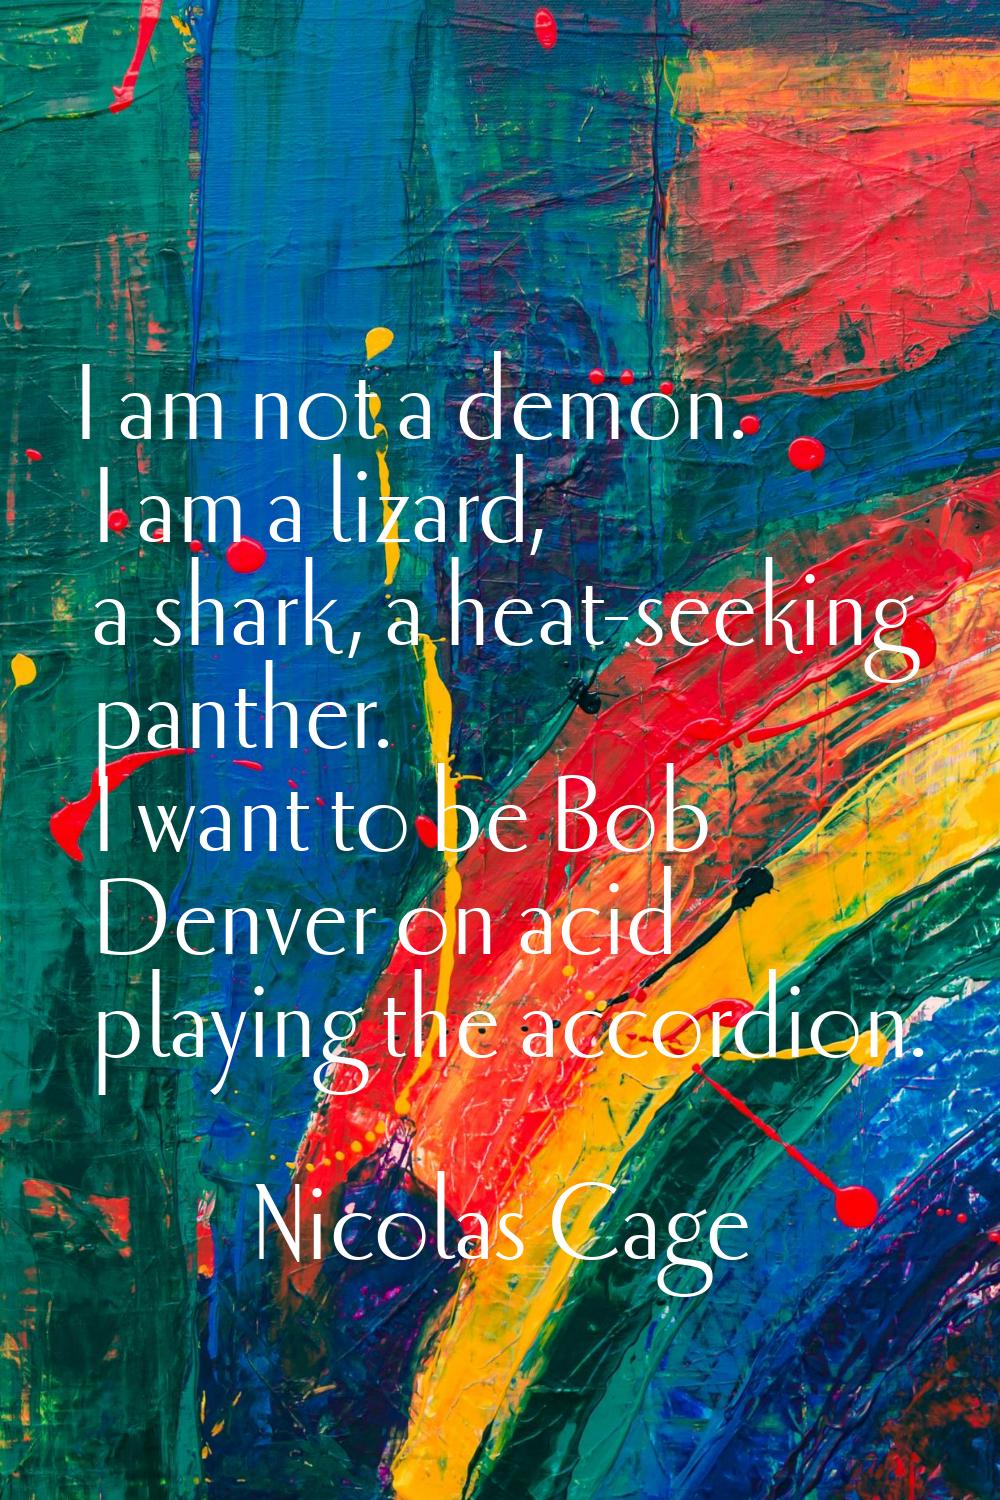 I am not a demon. I am a lizard, a shark, a heat-seeking panther. I want to be Bob Denver on acid p